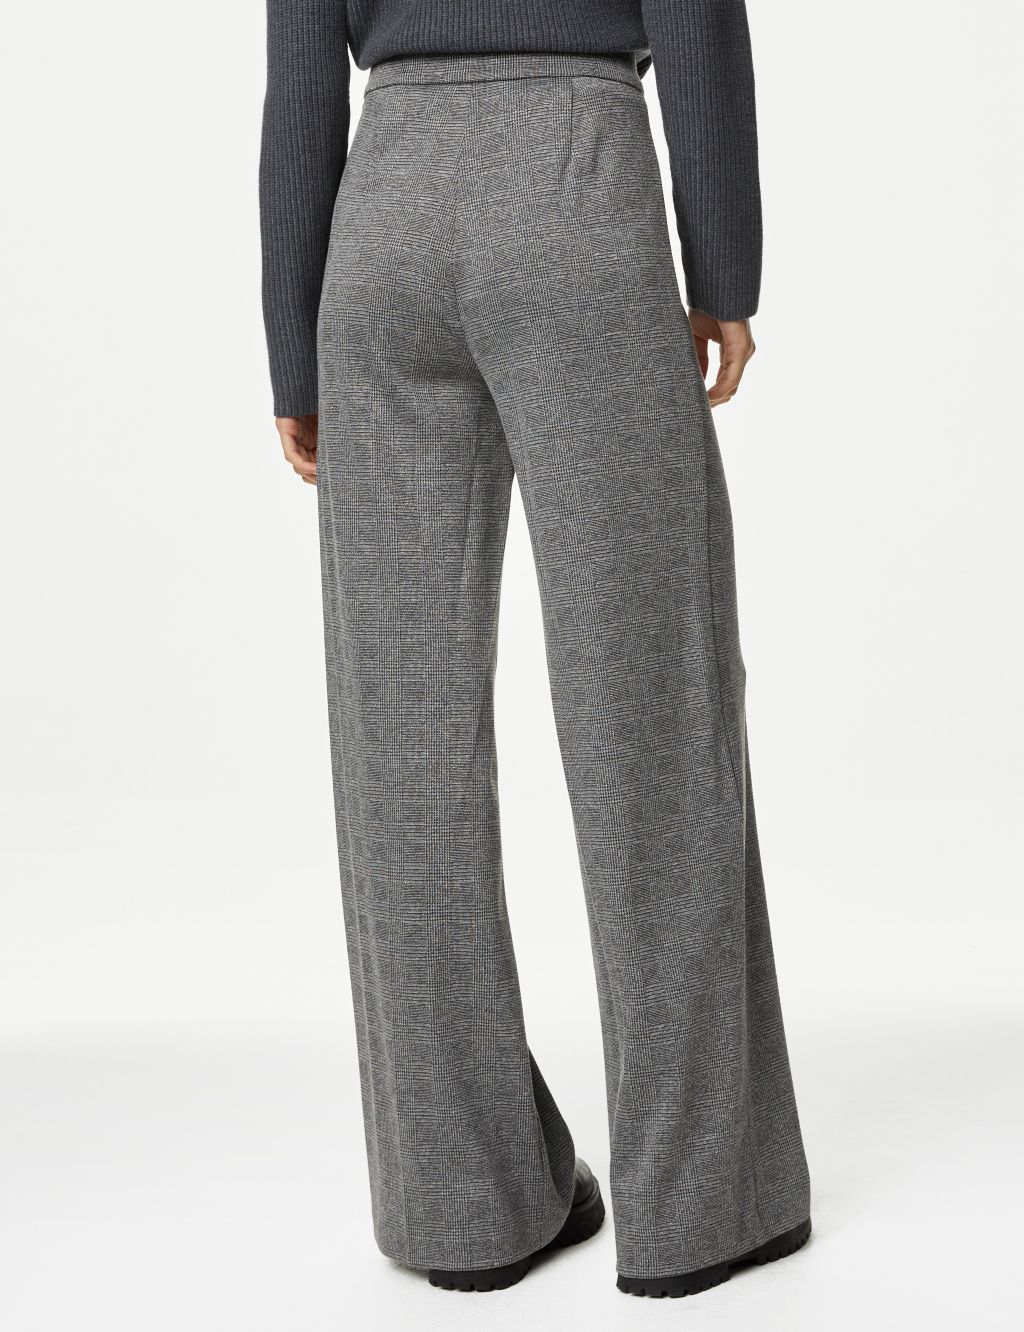 Jersey Checked Wide Leg Trousers image 4